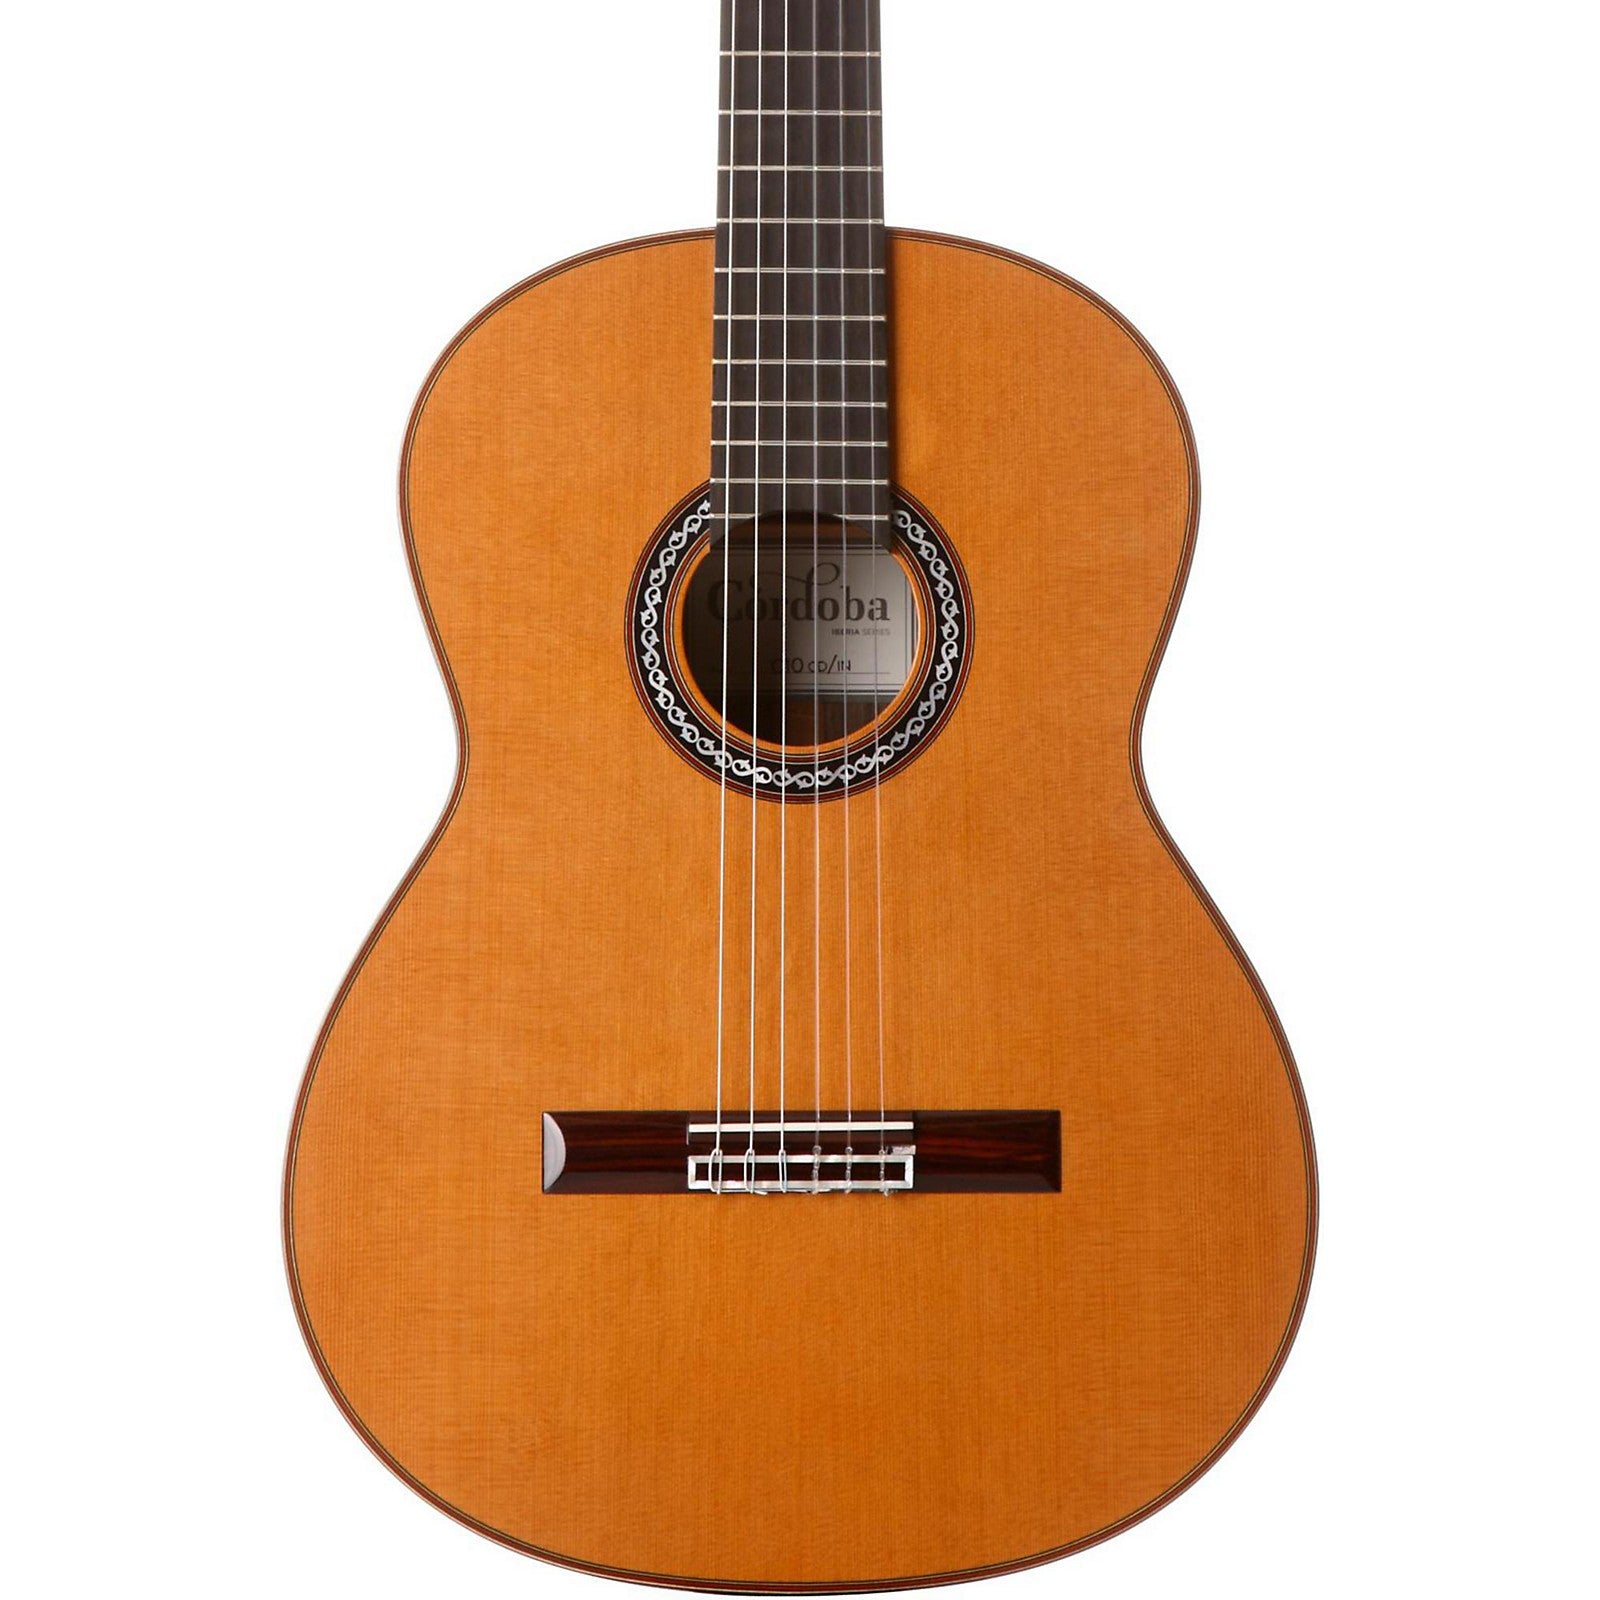 Cordoba C9 CD - Solid Canadian Cedar Top, Solid African Mahogany Back & Sides, With Cordoba Polyfoam Guitar Case (Full Solid)